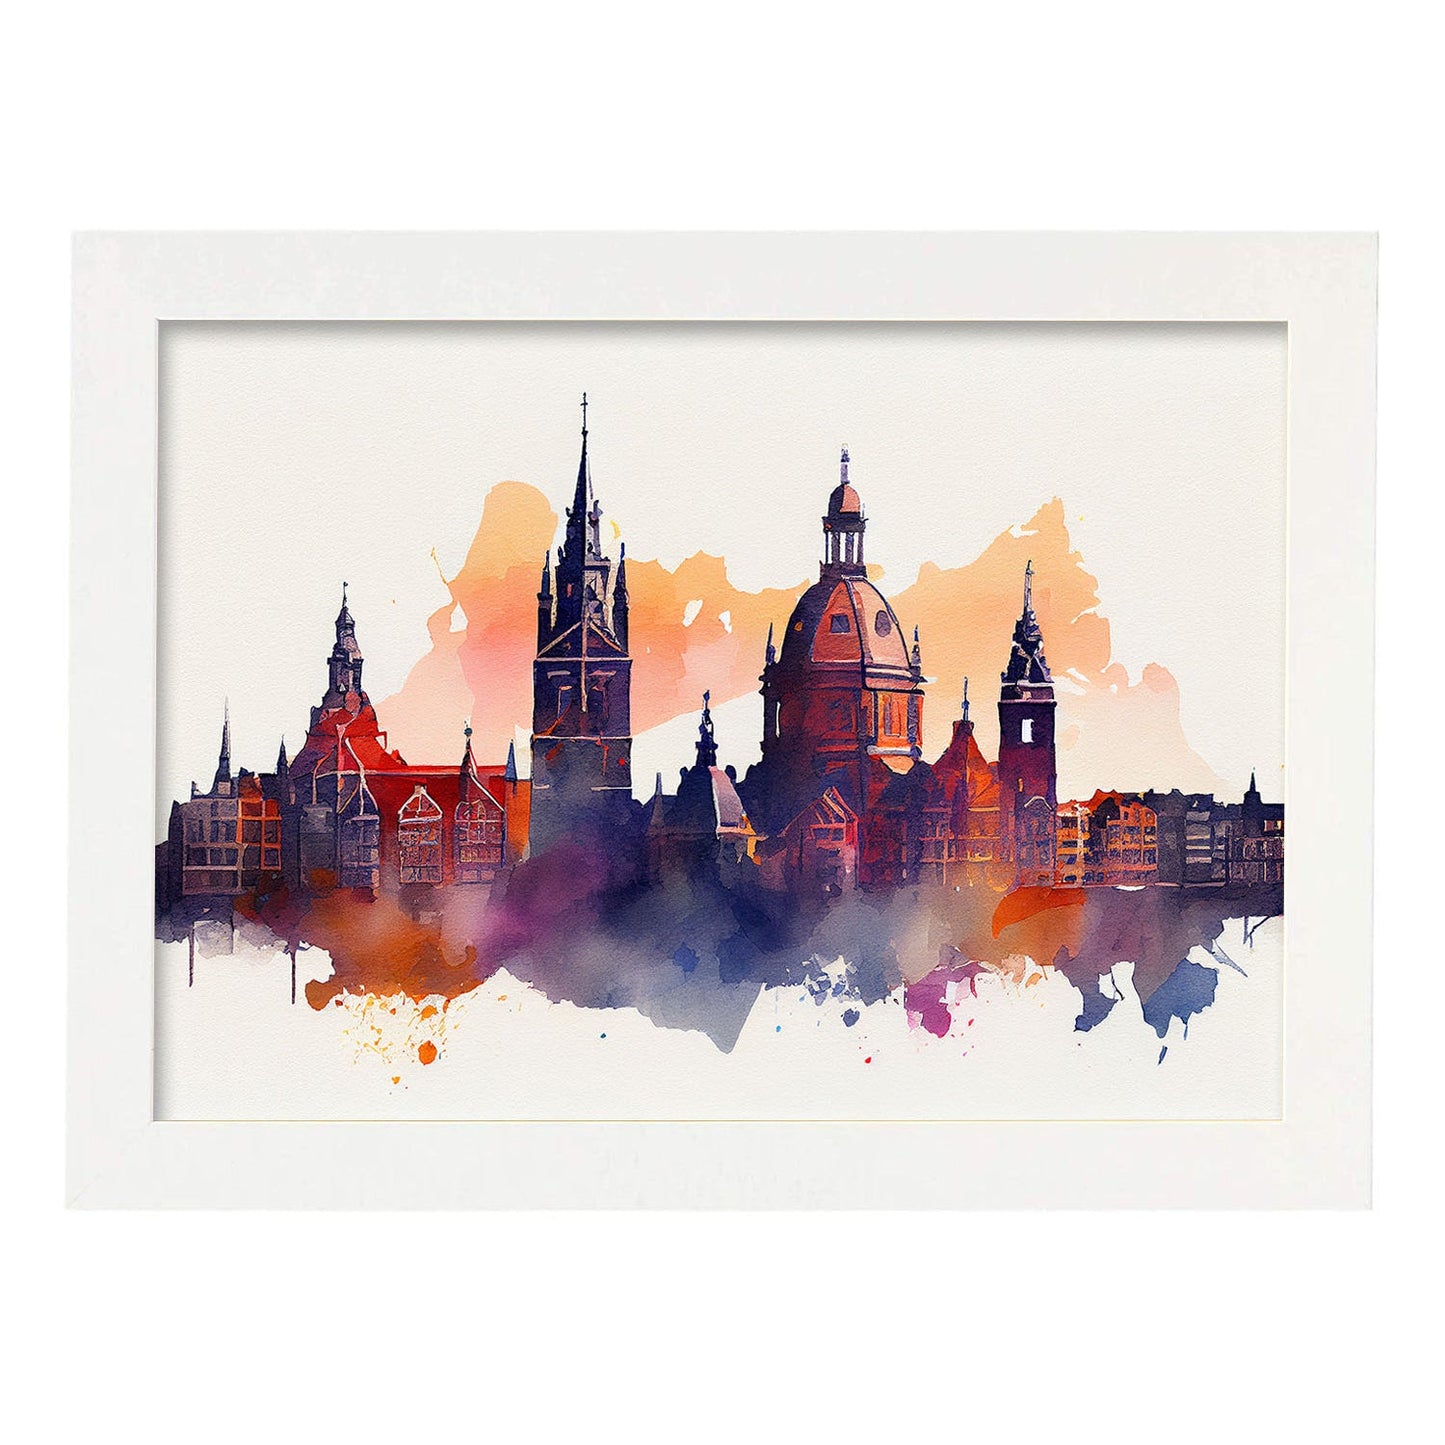 Nacnic watercolor of a skyline of the city of Amsterdam_2. Aesthetic Wall Art Prints for Bedroom or Living Room Design.-Artwork-Nacnic-A4-Marco Blanco-Nacnic Estudio SL